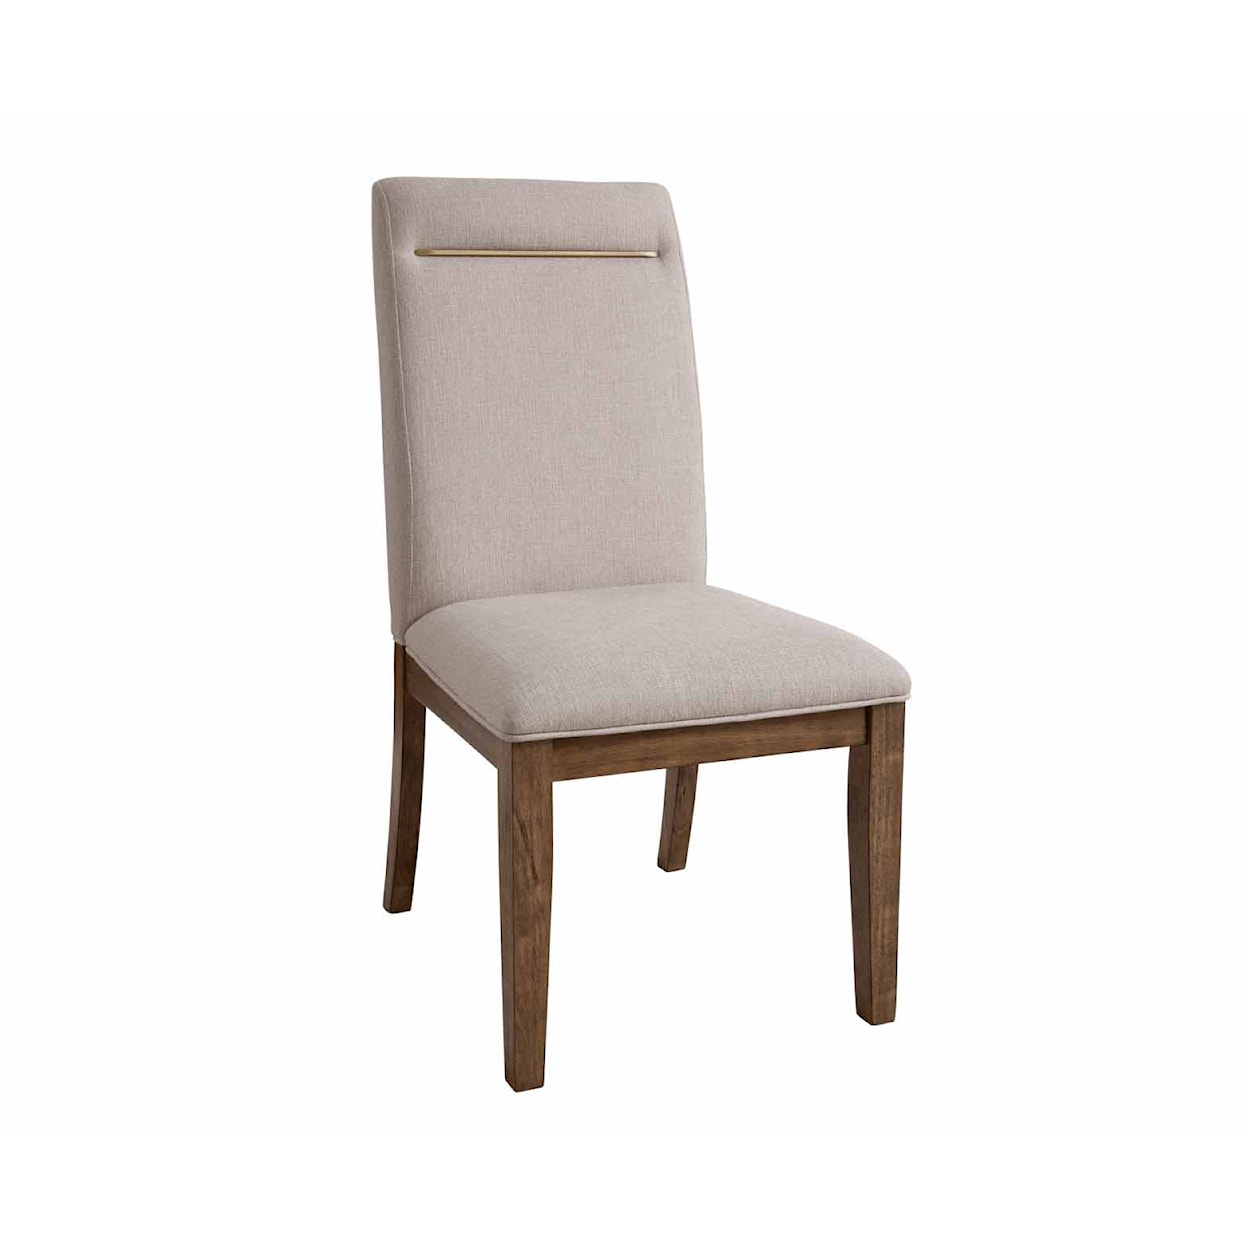 Steve Silver Garland Dining Upholstered Side Chair